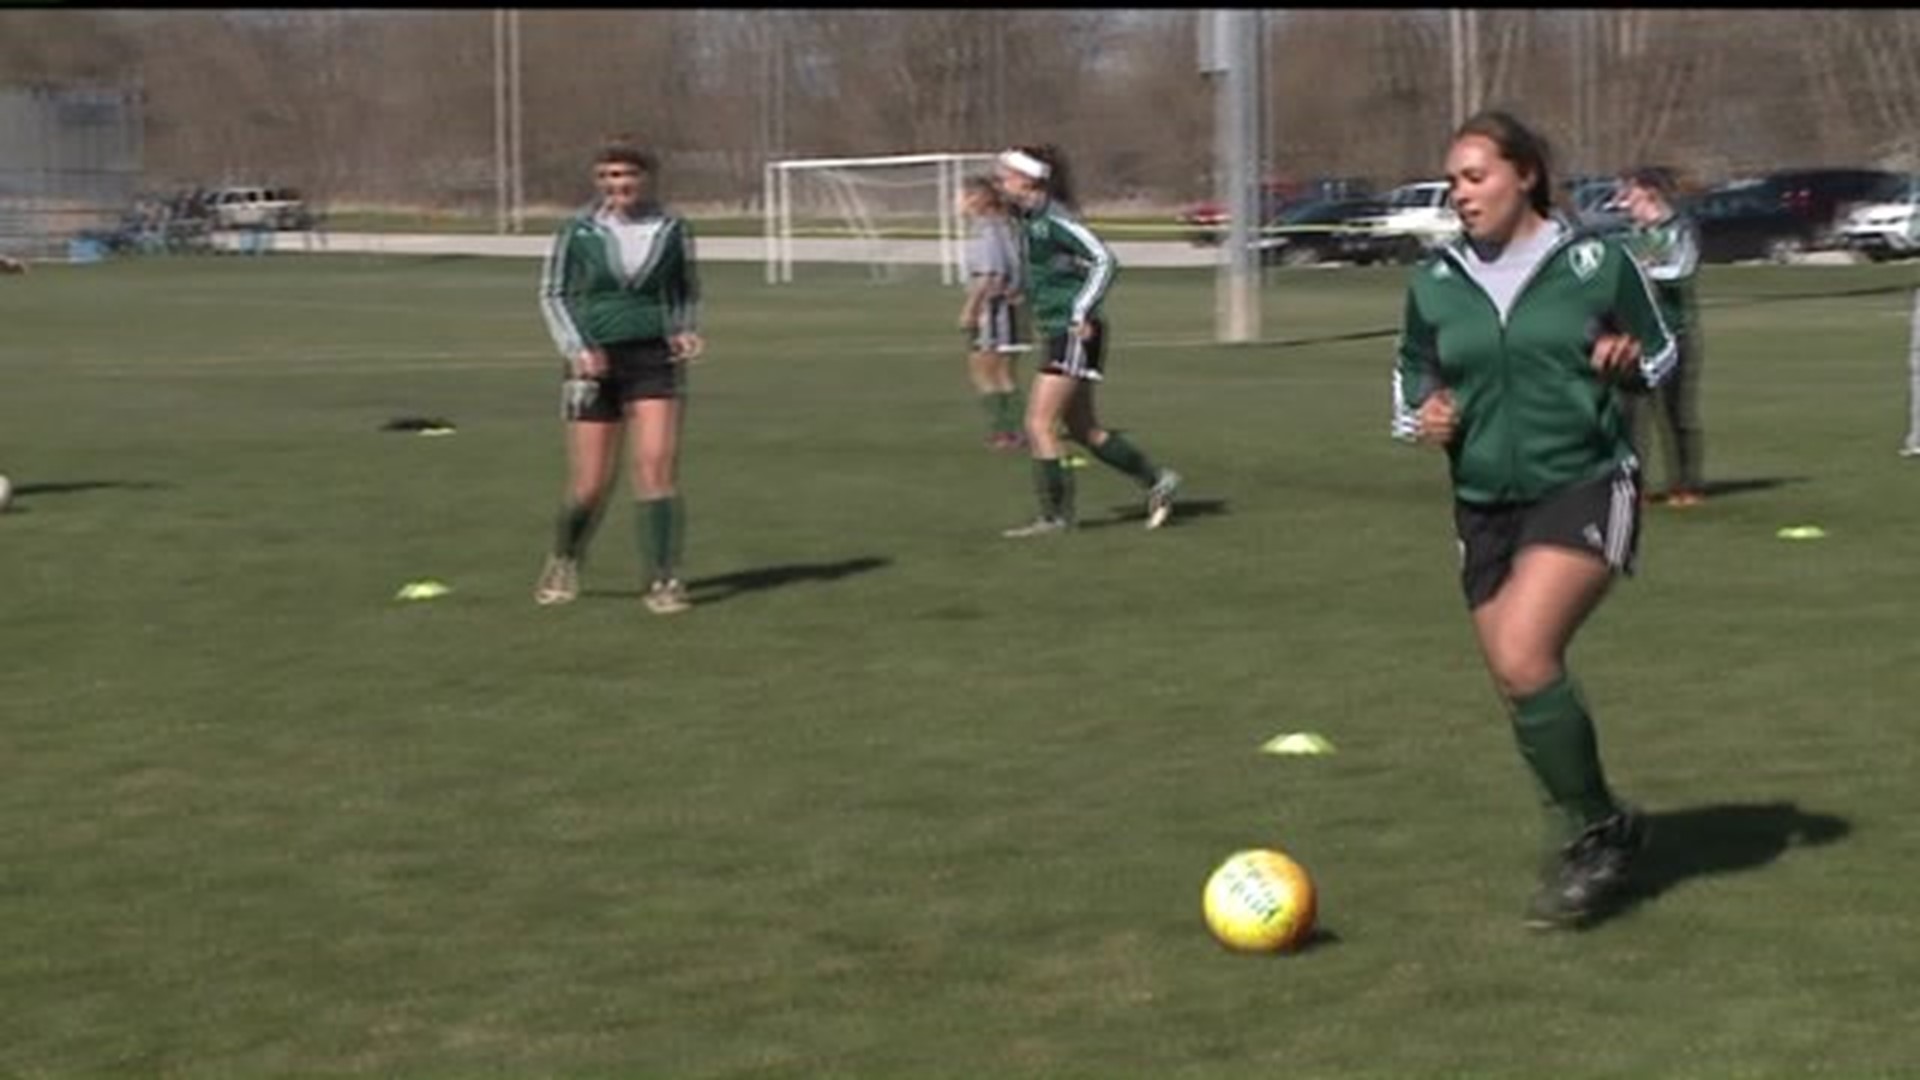 Alleman motivated for a return trip to State in Class 2A